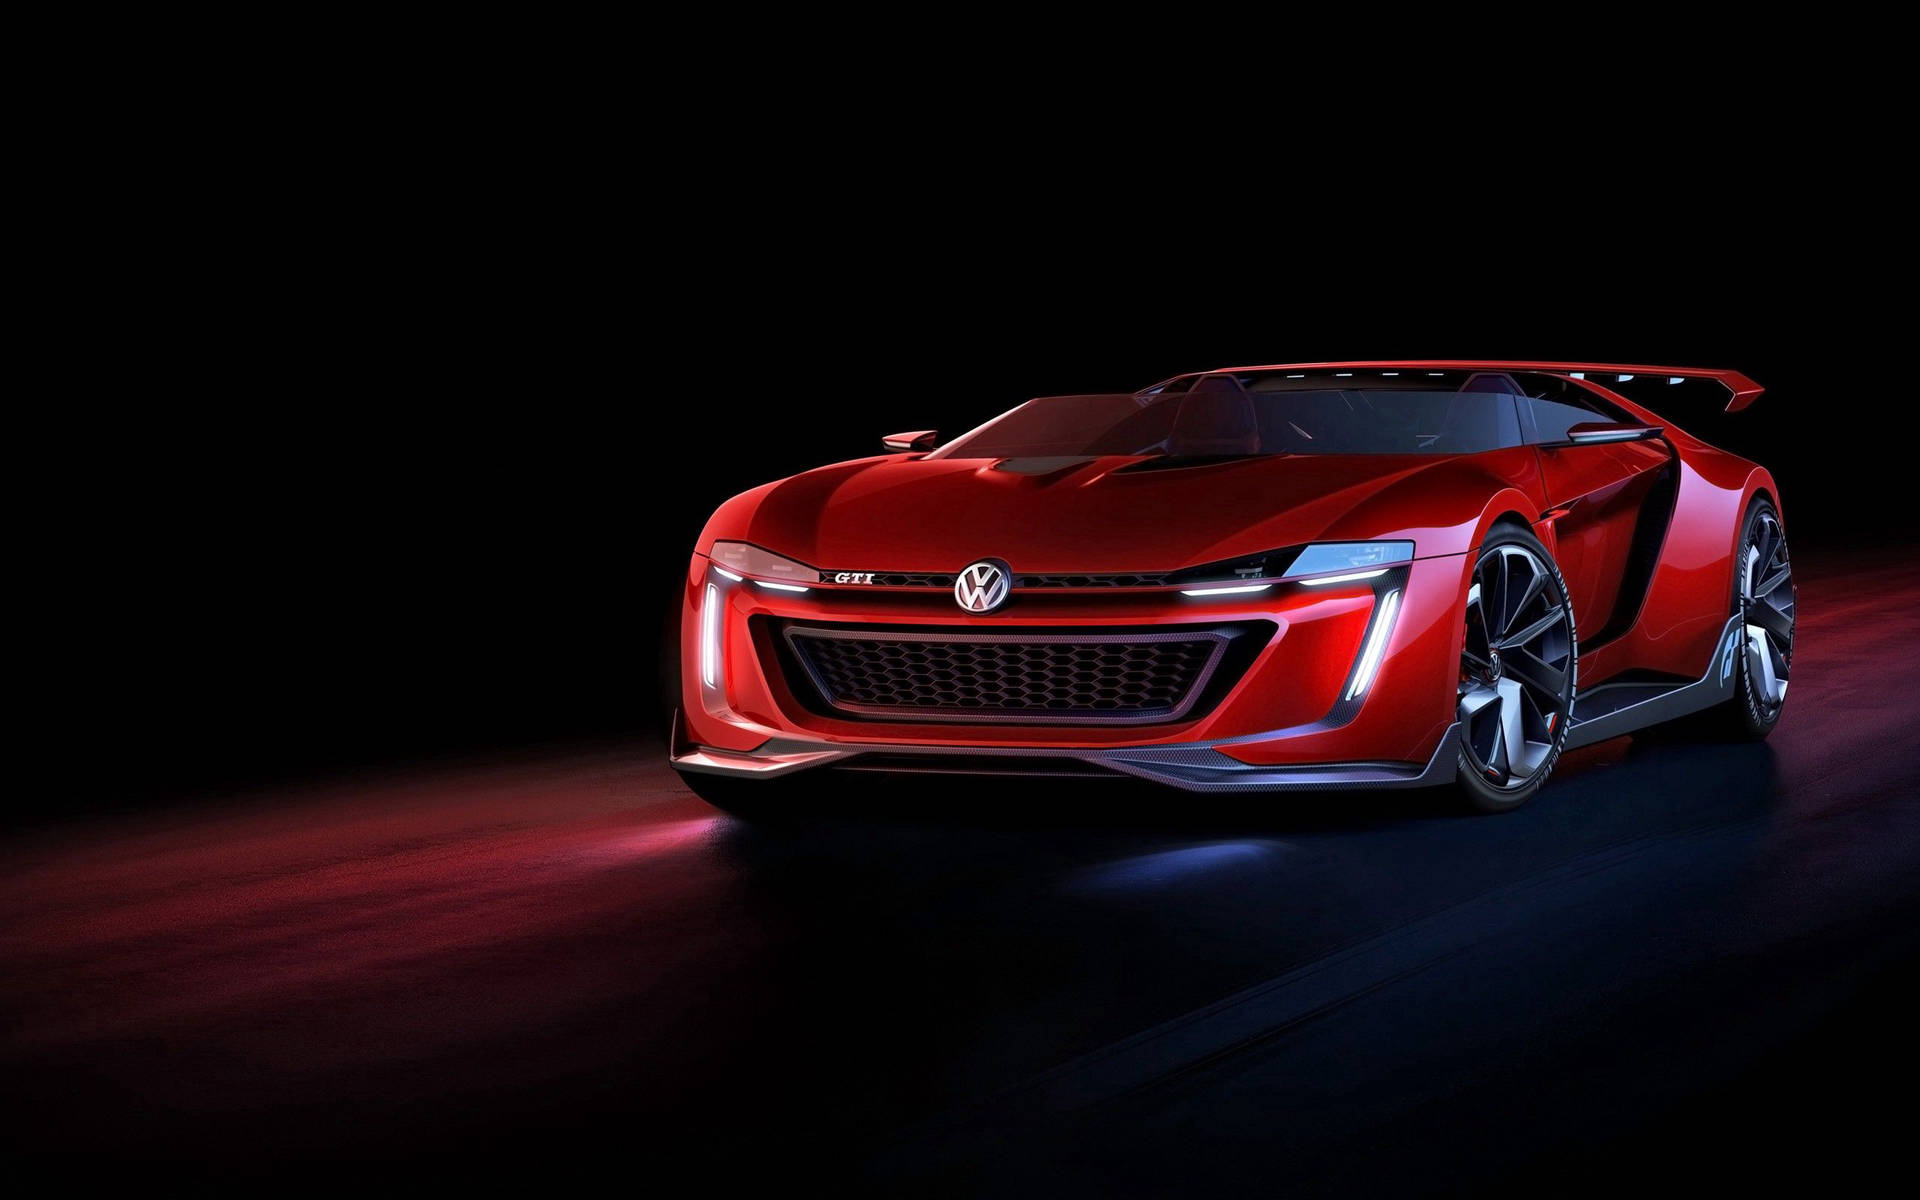 Driving off the Red Roadster of Volkswagen GTI Wallpaper